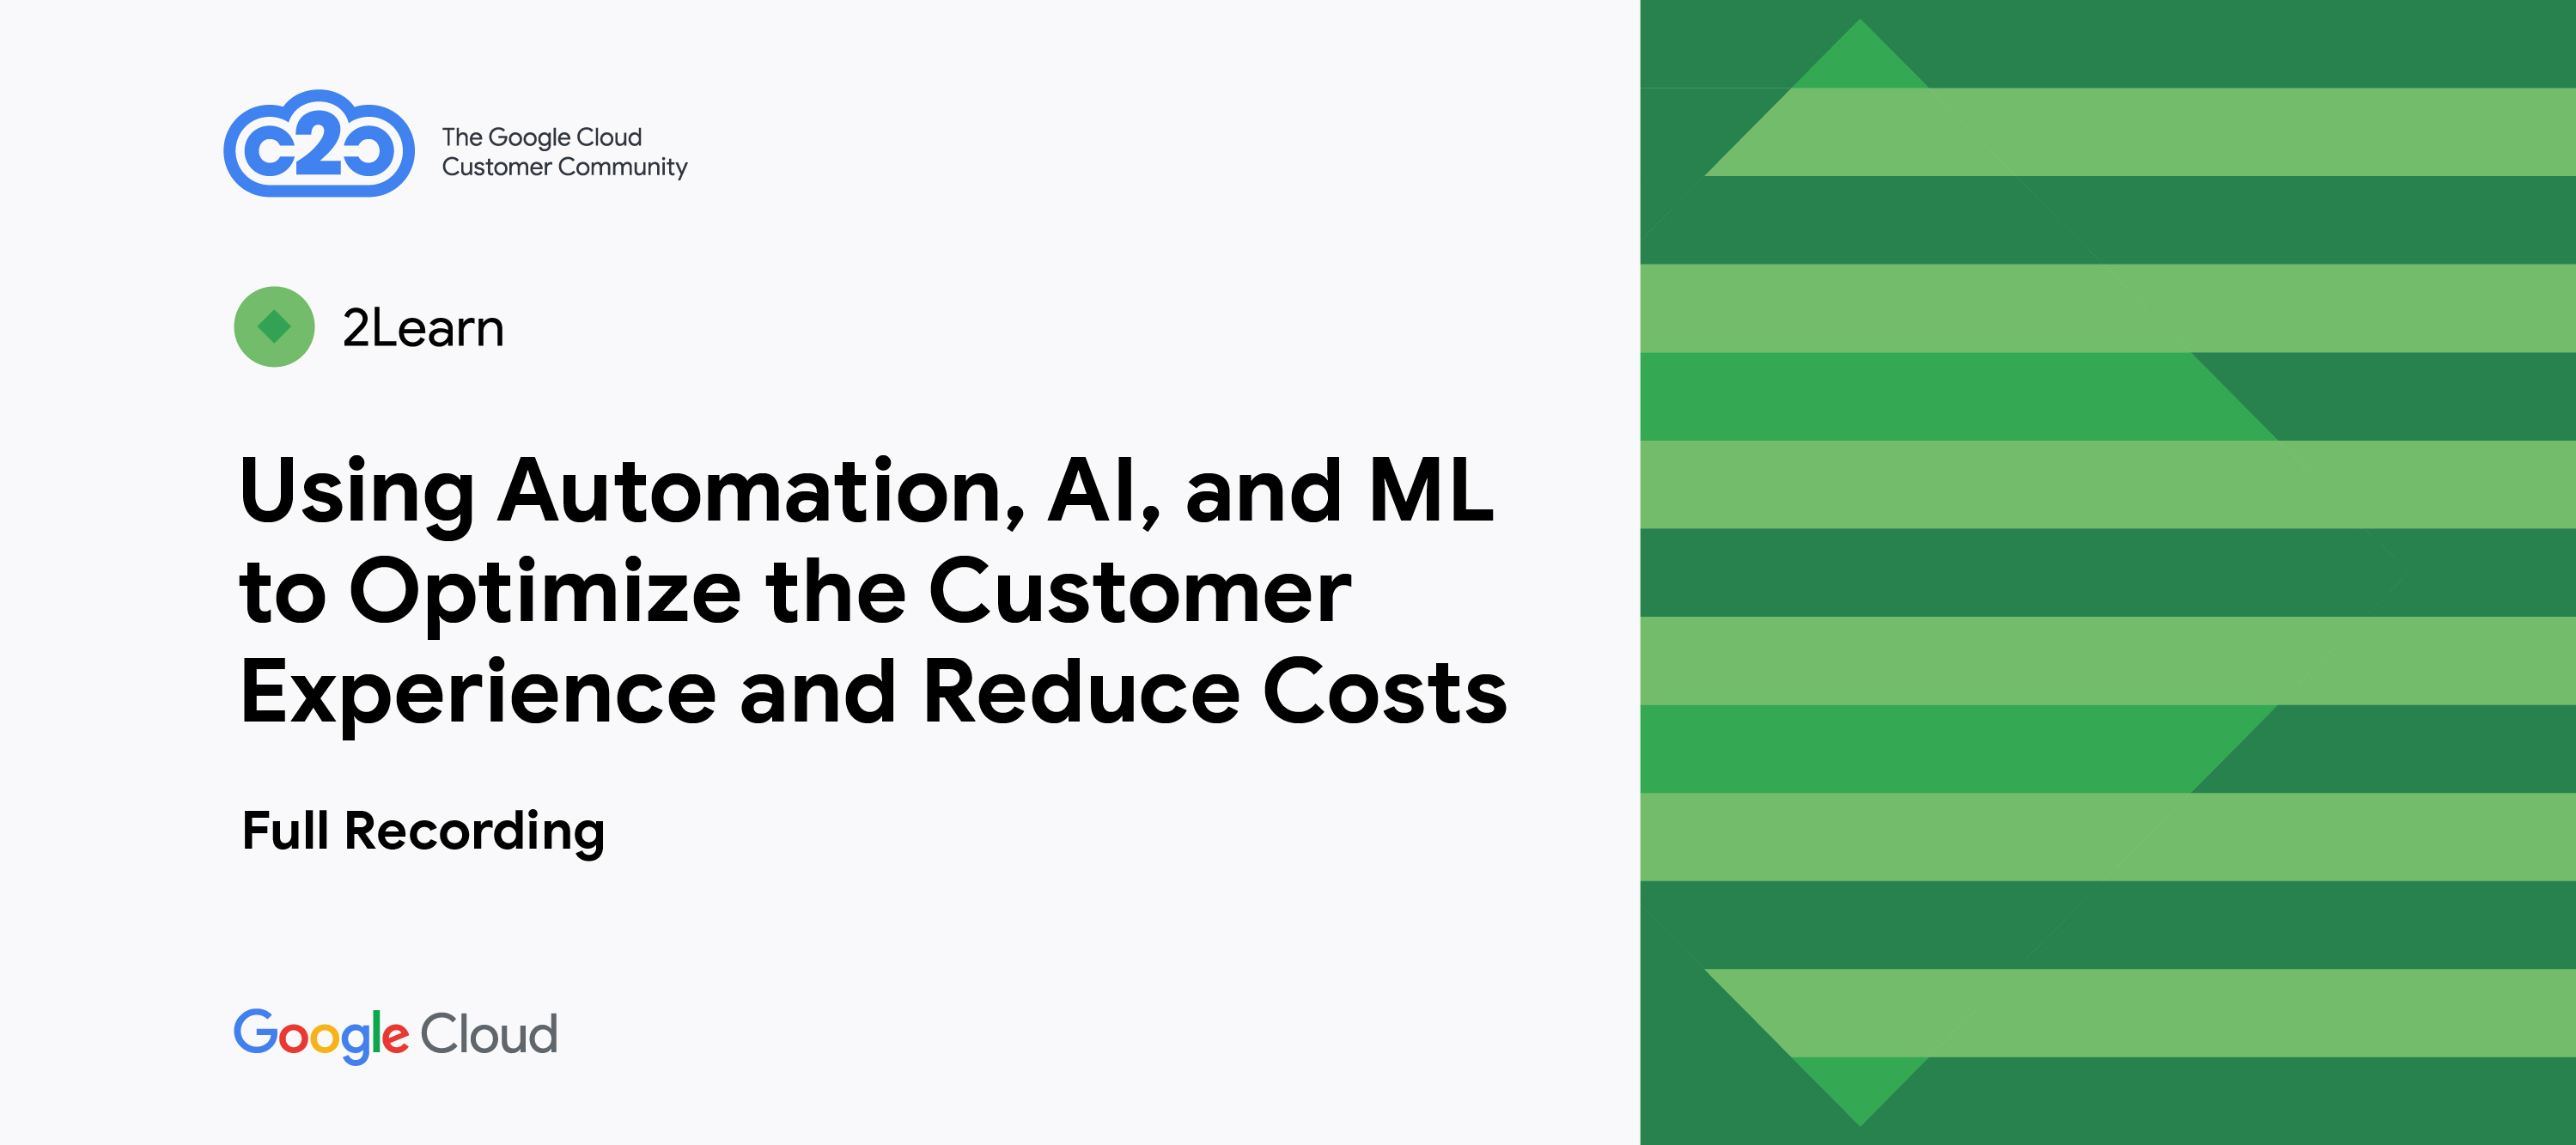 Using Automation, AI, and ML to Optimize the Customer Experience and Reduce Costs (full recording)